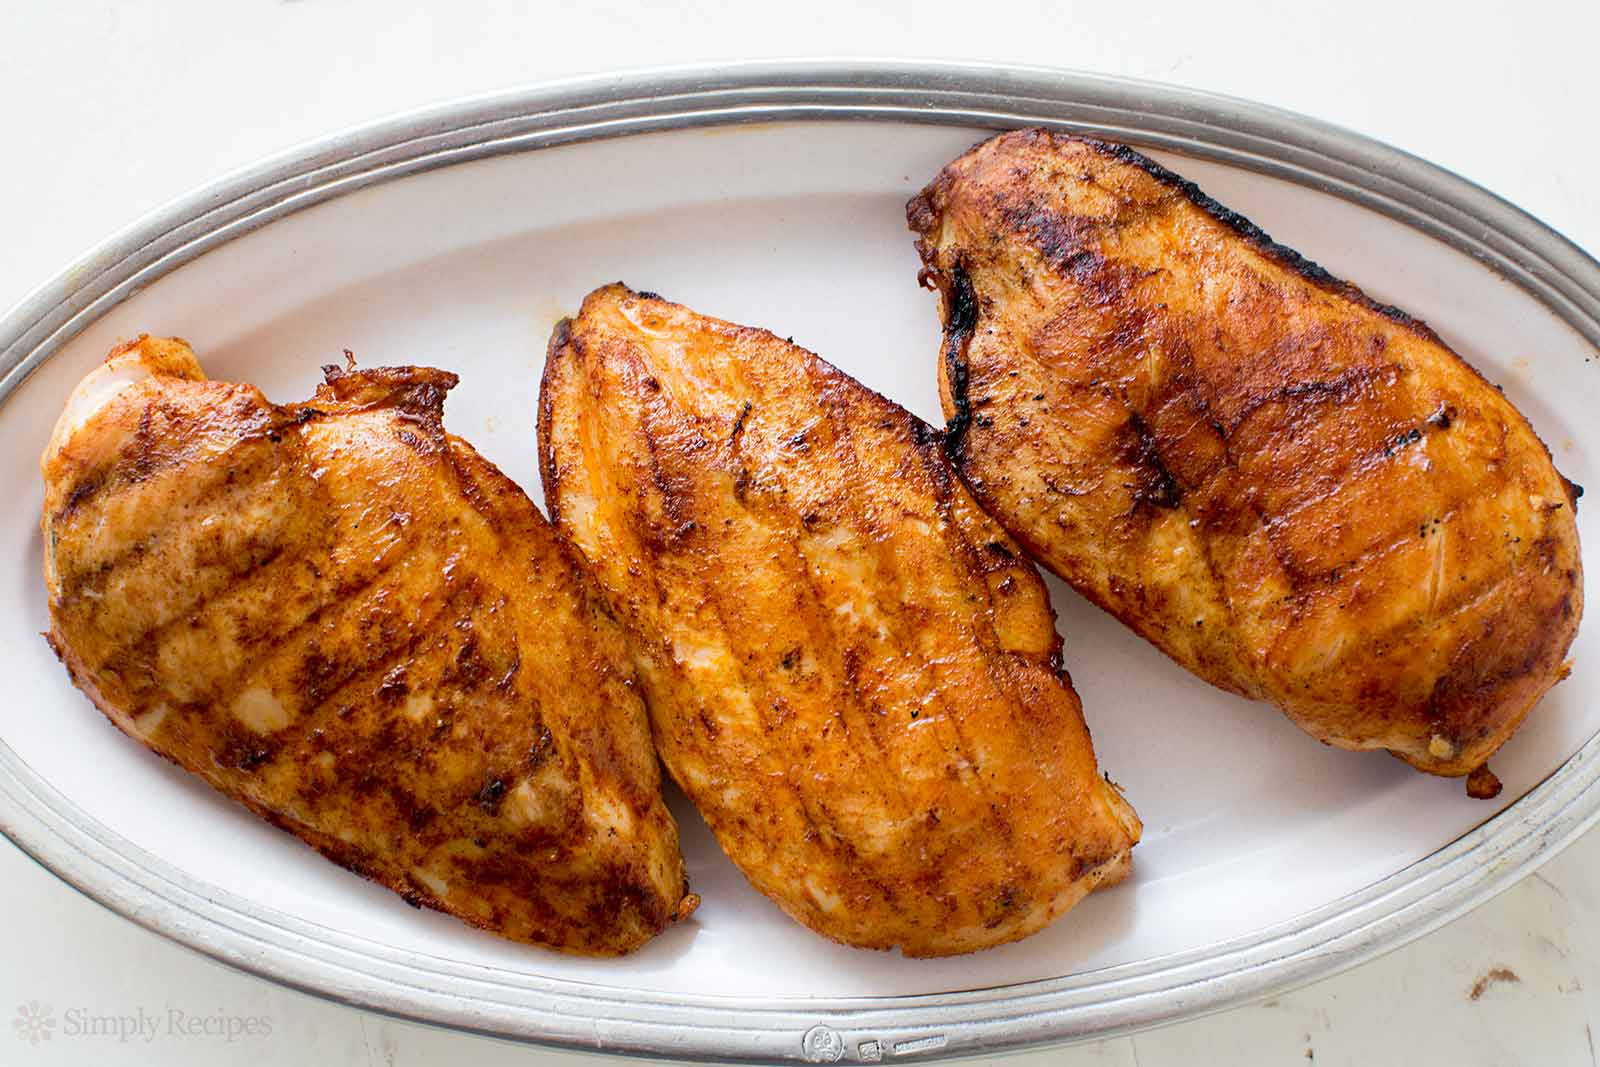 Fried Boneless Chicken Breast
 How to Grill Juicy Boneless Skinless Chicken Breasts